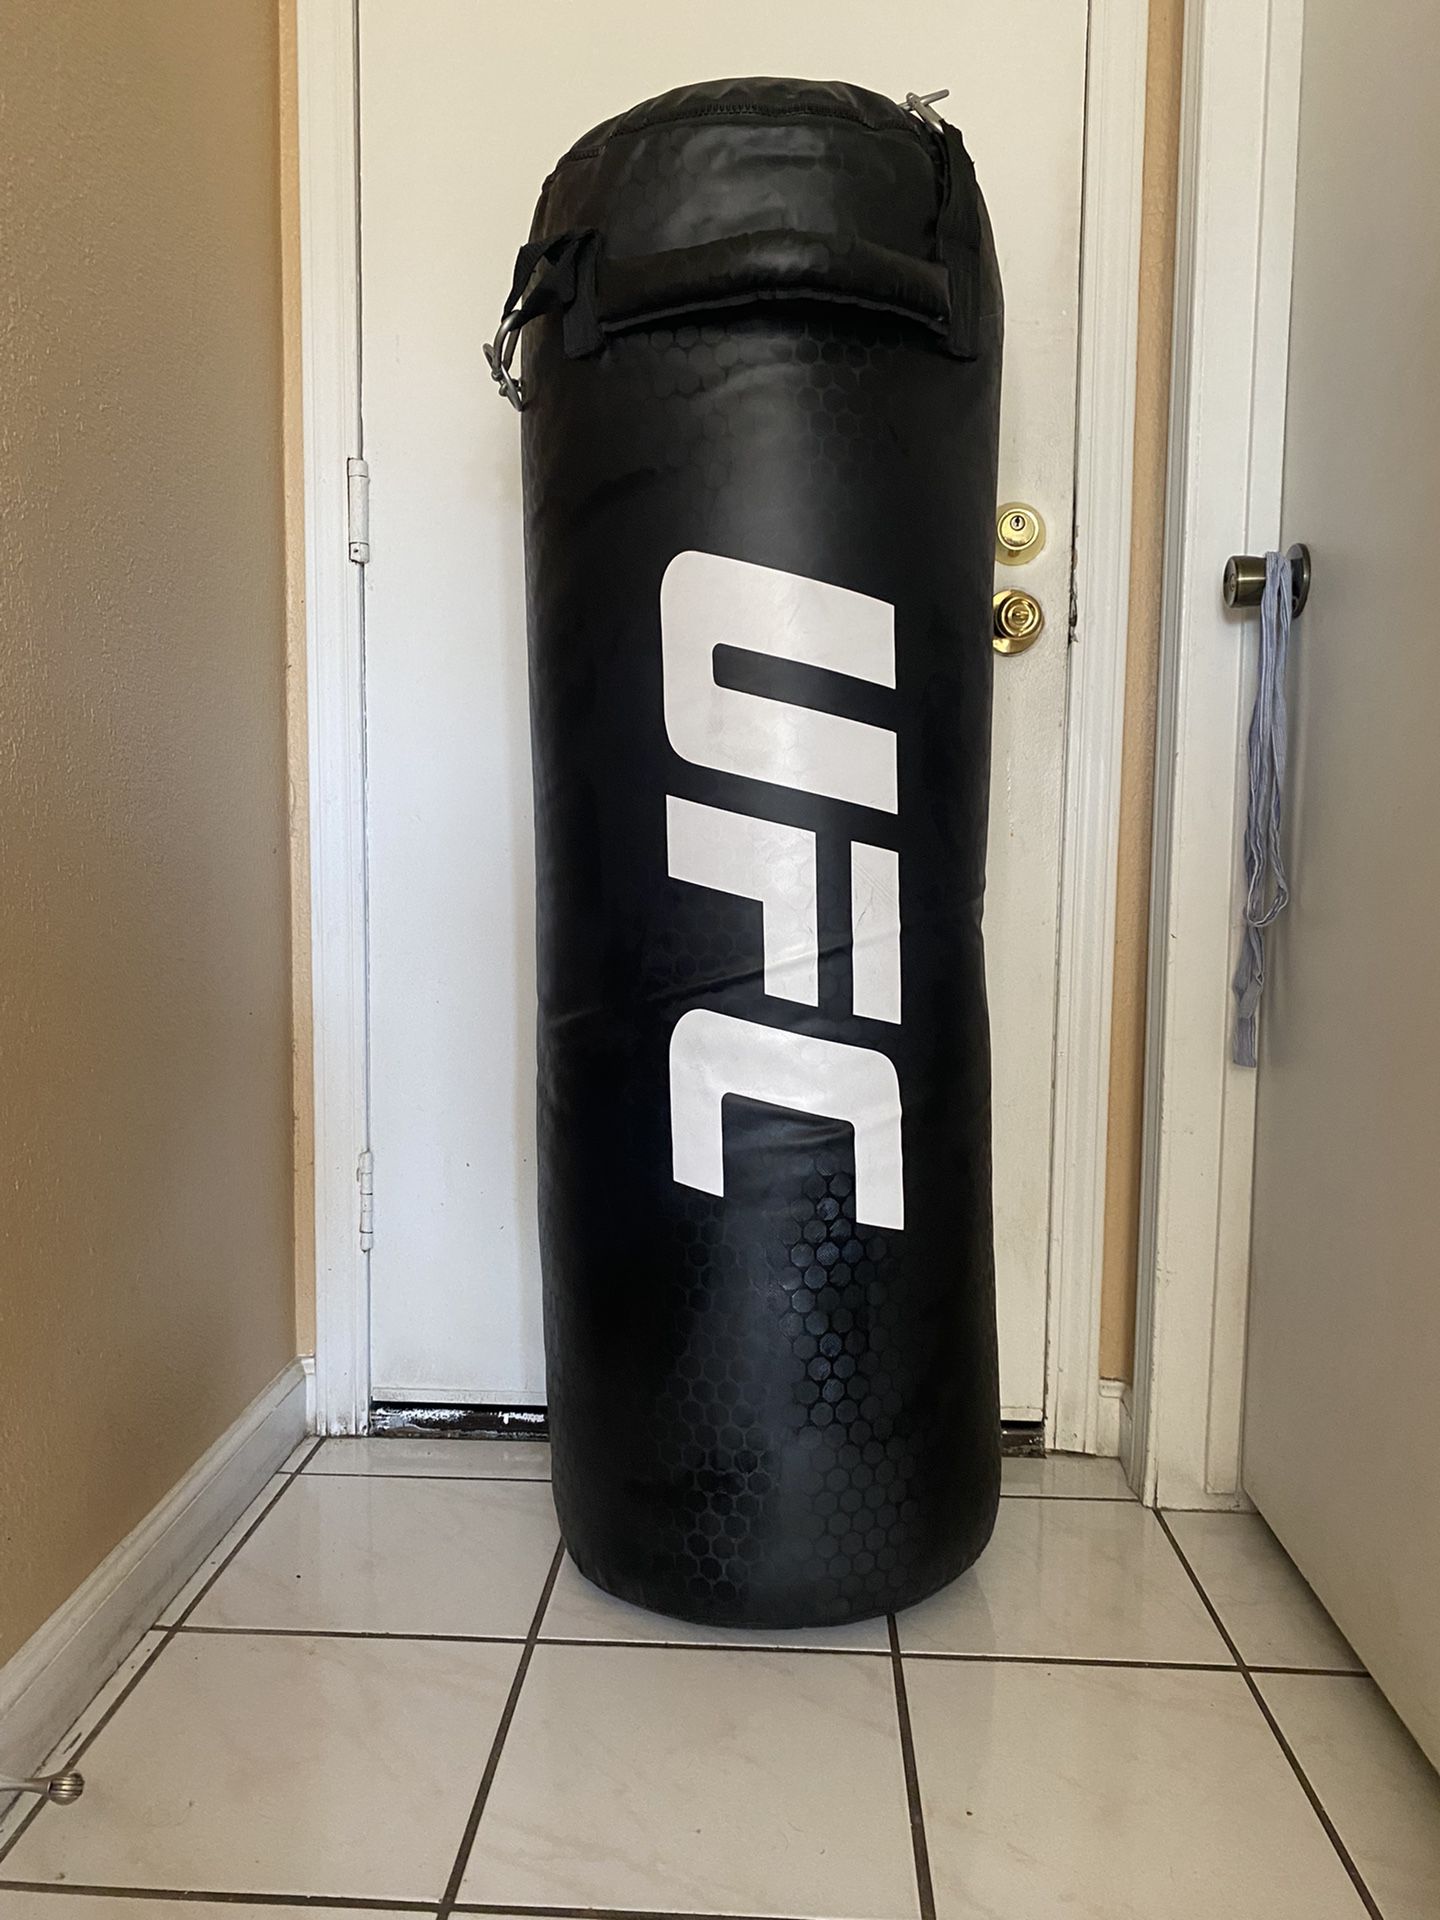 PUNCHING BAG 100 POUNDS FILLED PERFECT WORKOUT 